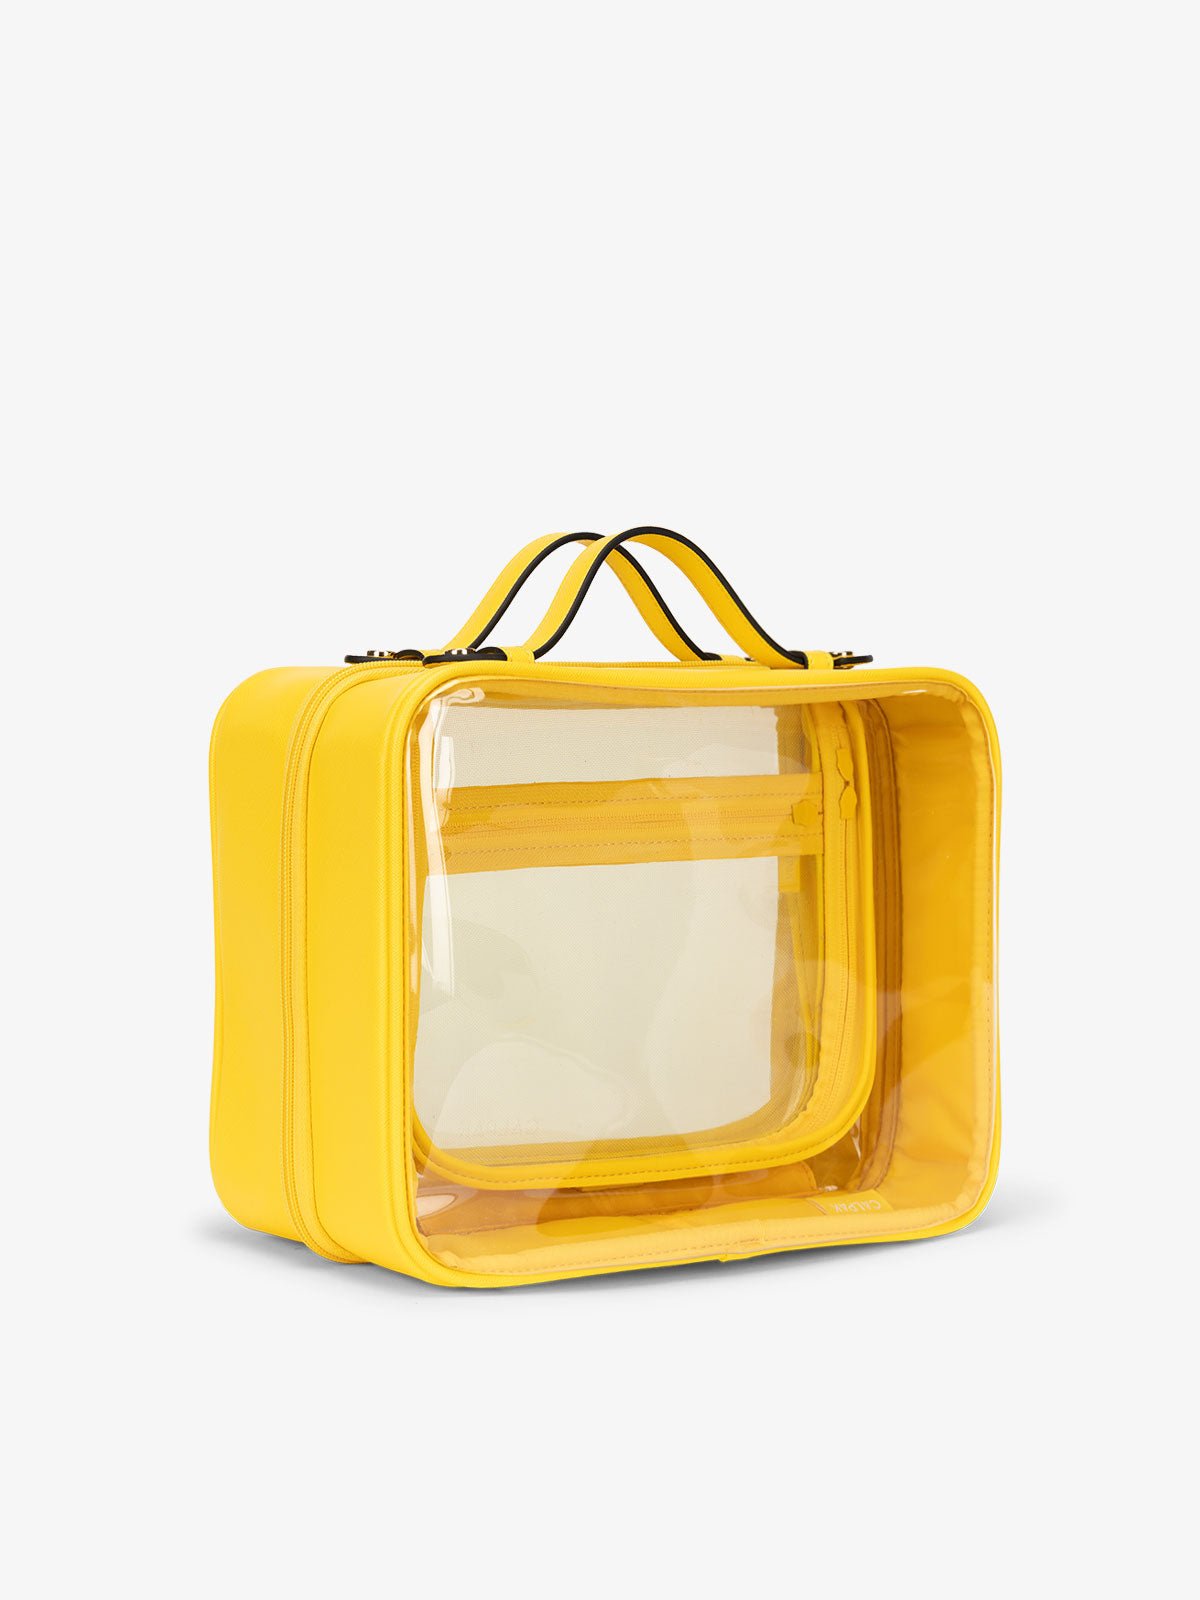 CALPAK large clear skincare bag with multiple zippered compartments in yellow